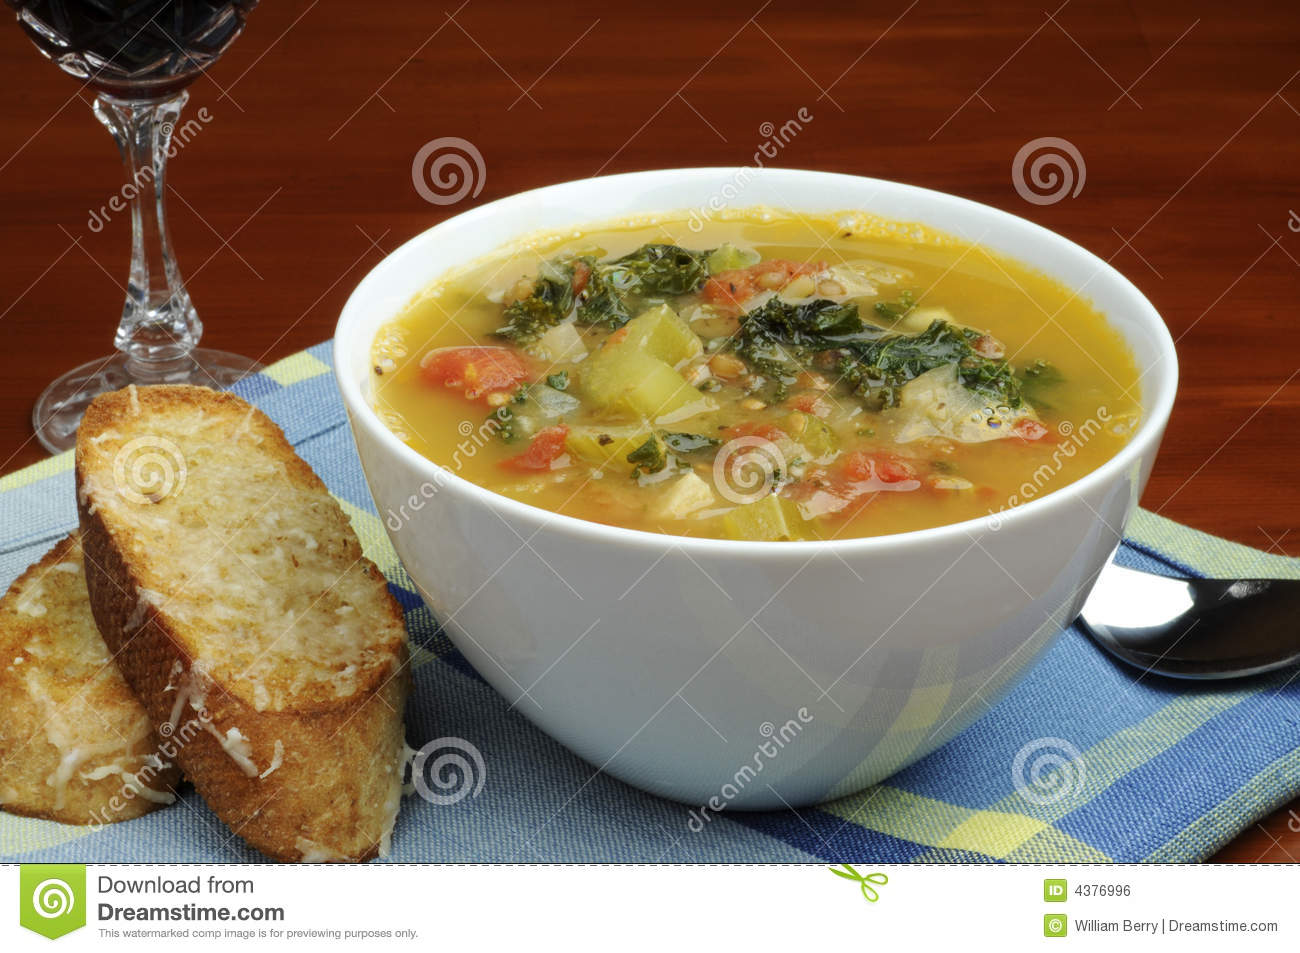 Homemade Soup Royalty Free Stock Image   Image  4376996